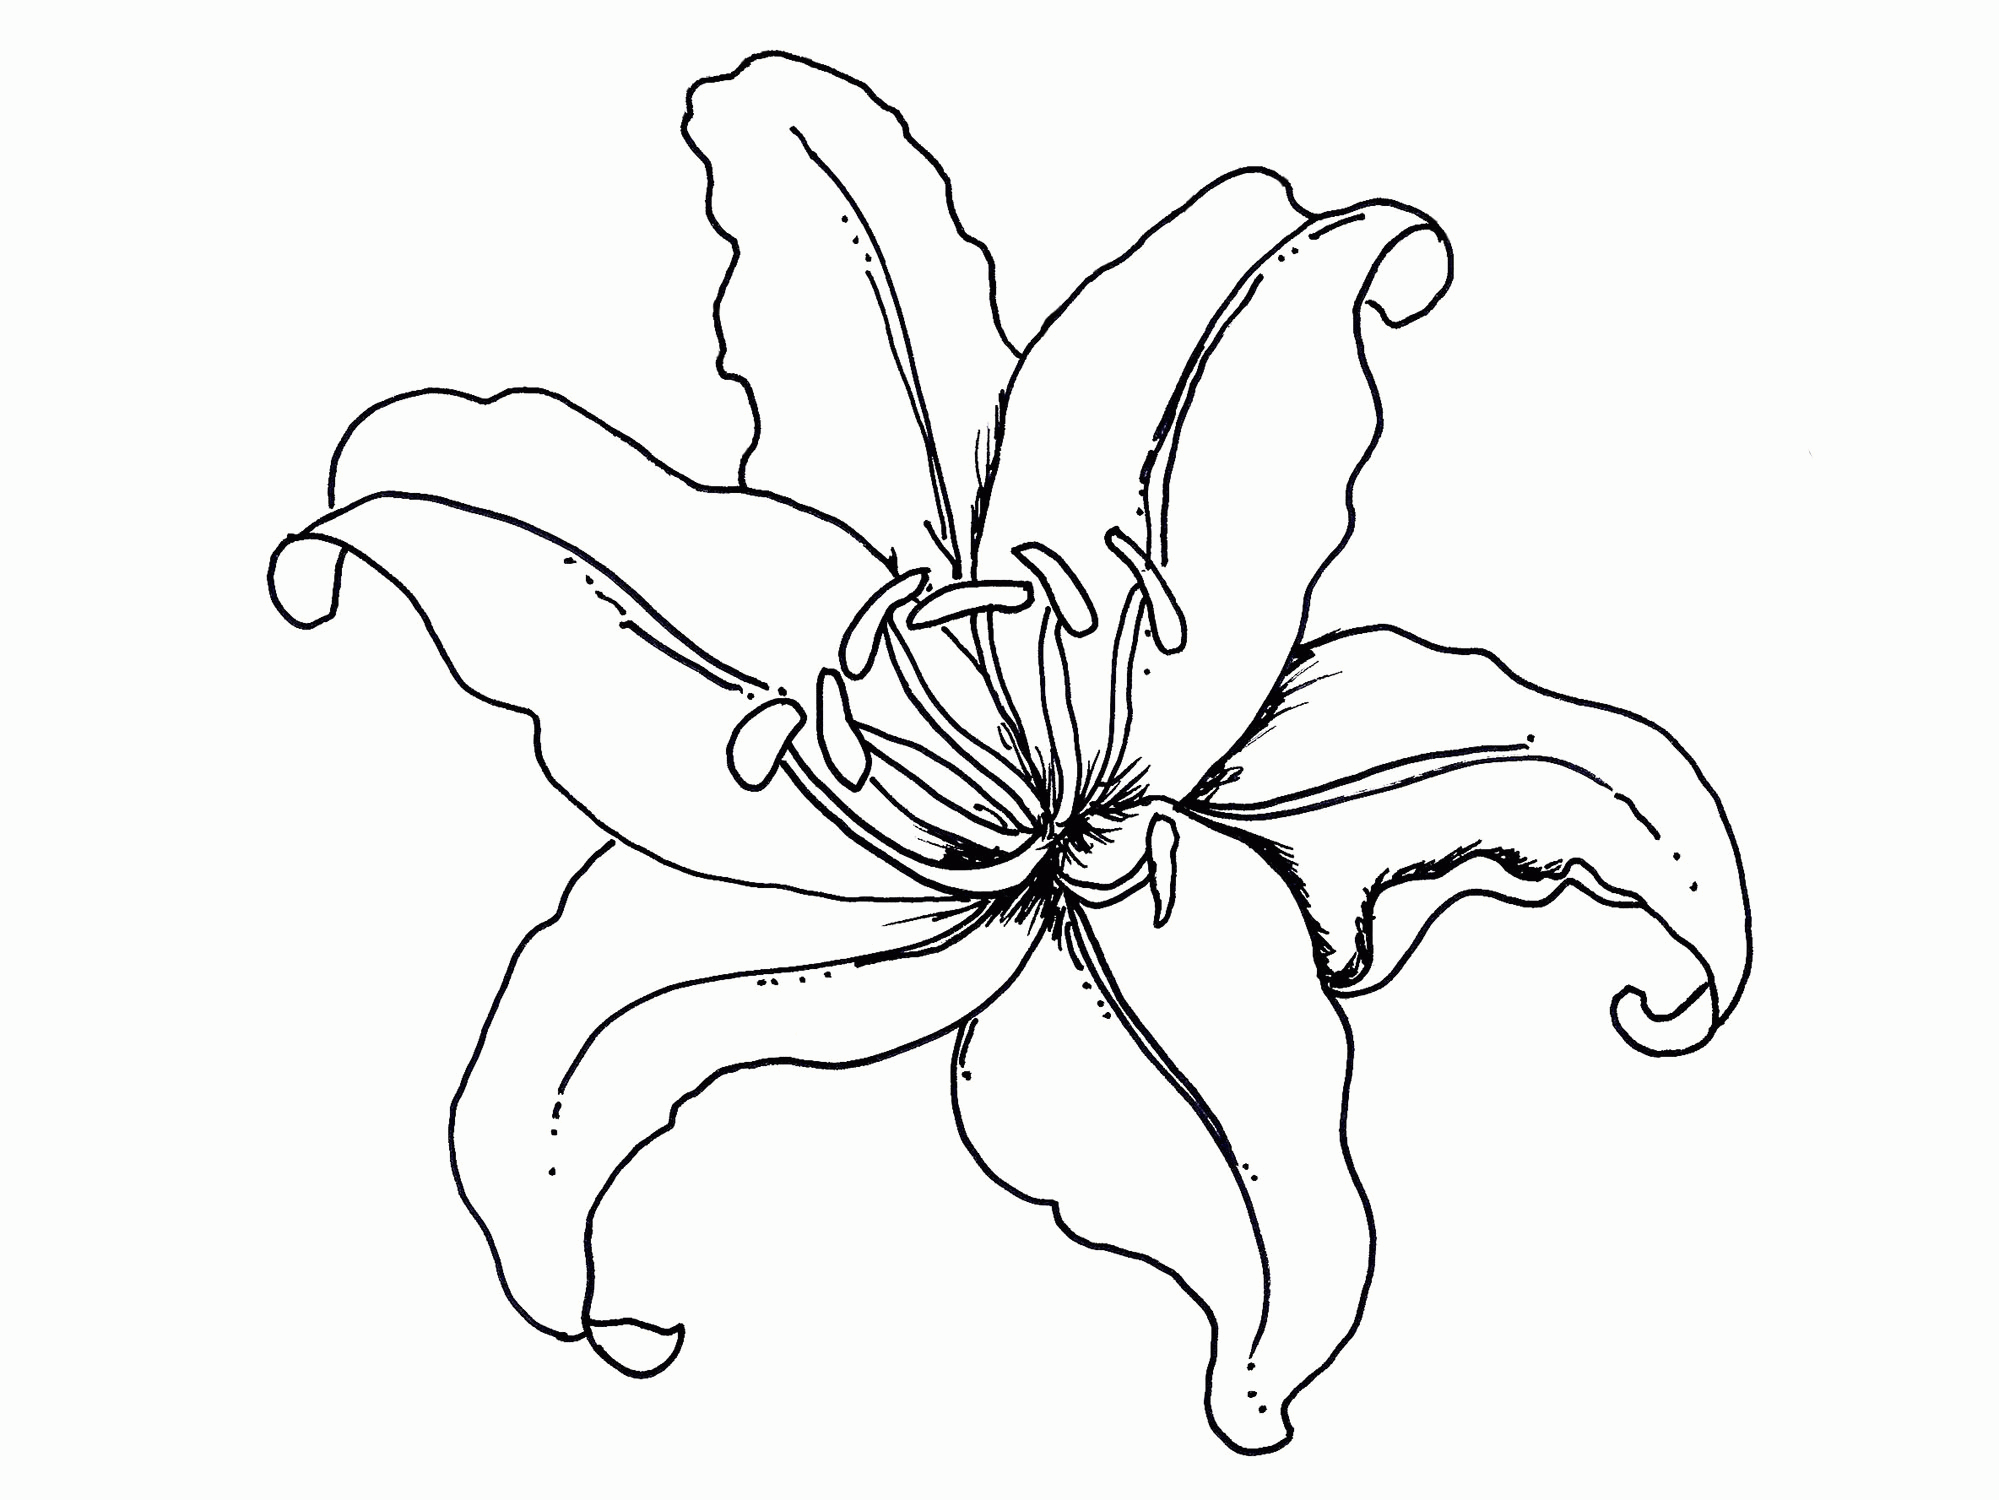 Flowers Coloring Pages 20 Pictures   Colorine.net   20 ...